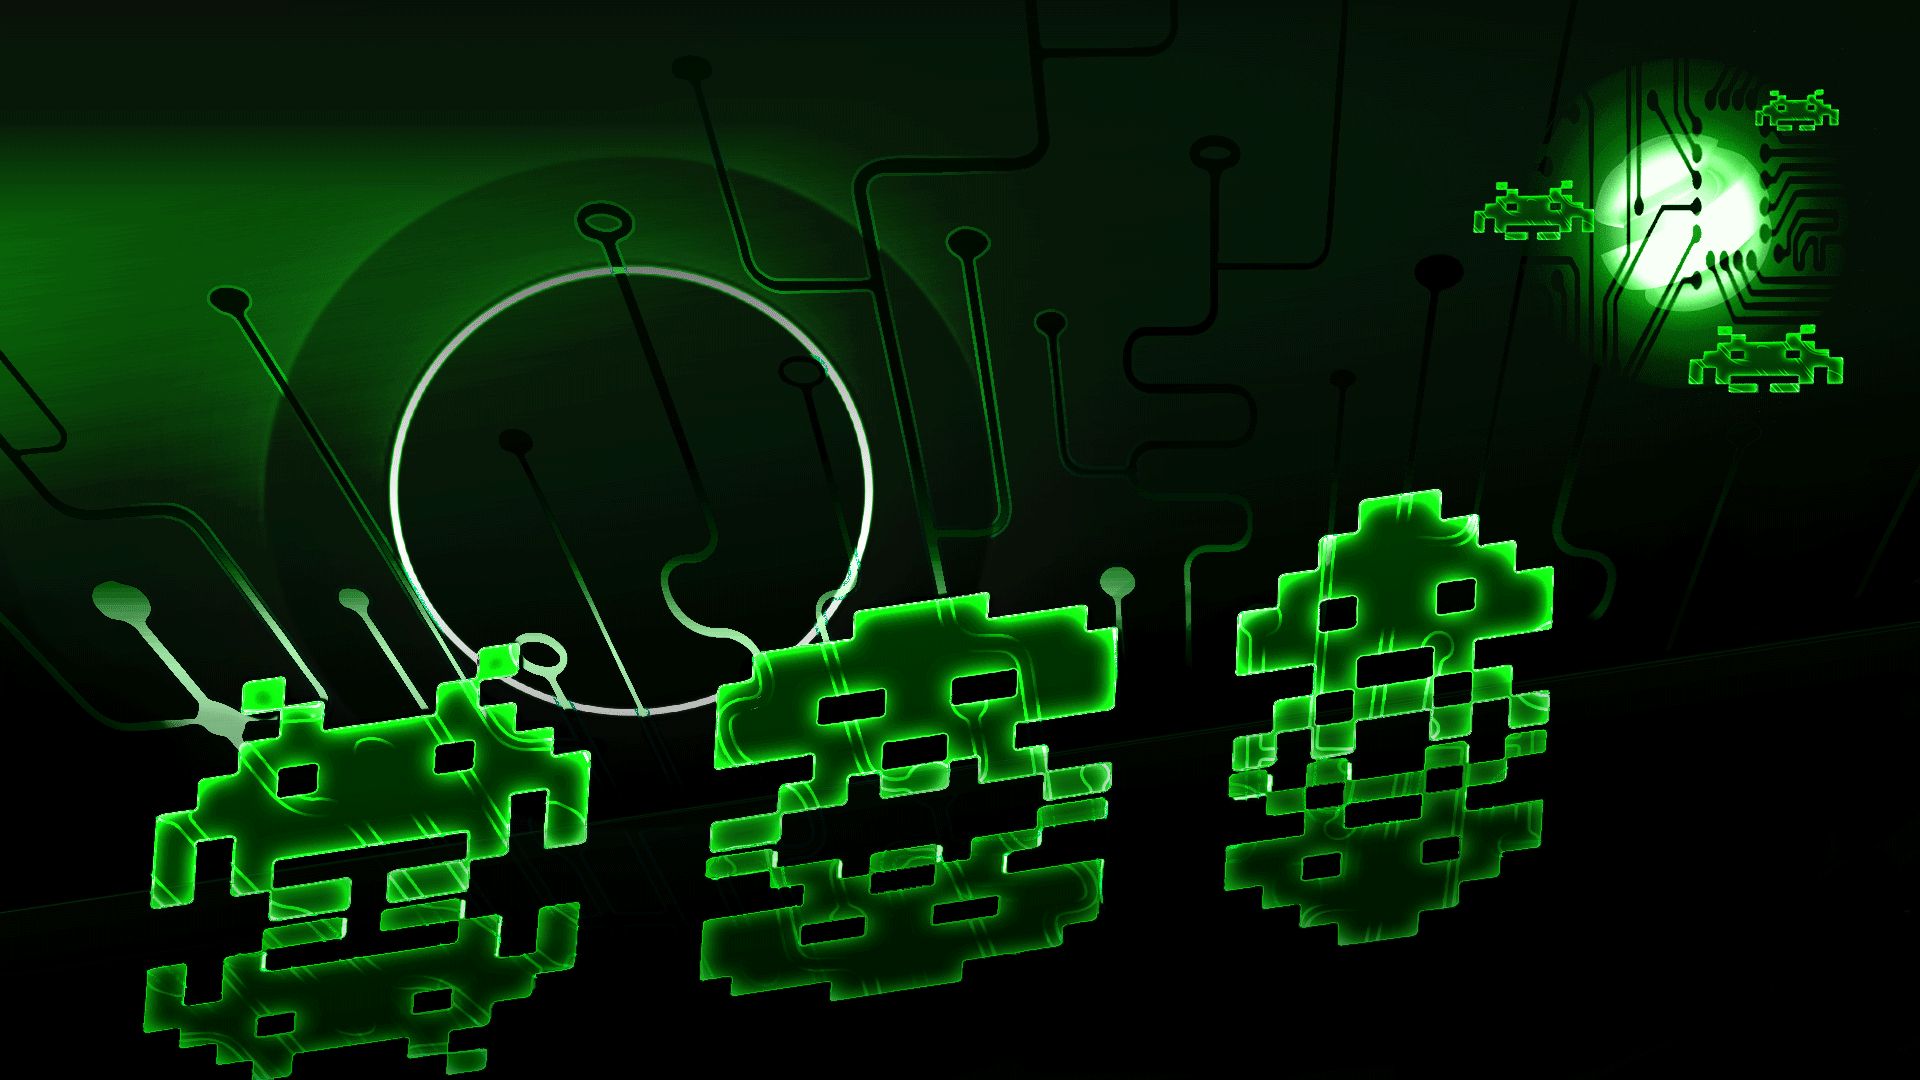 Green Invader Animated Wallpaper - Graphic Design , HD Wallpaper & Backgrounds